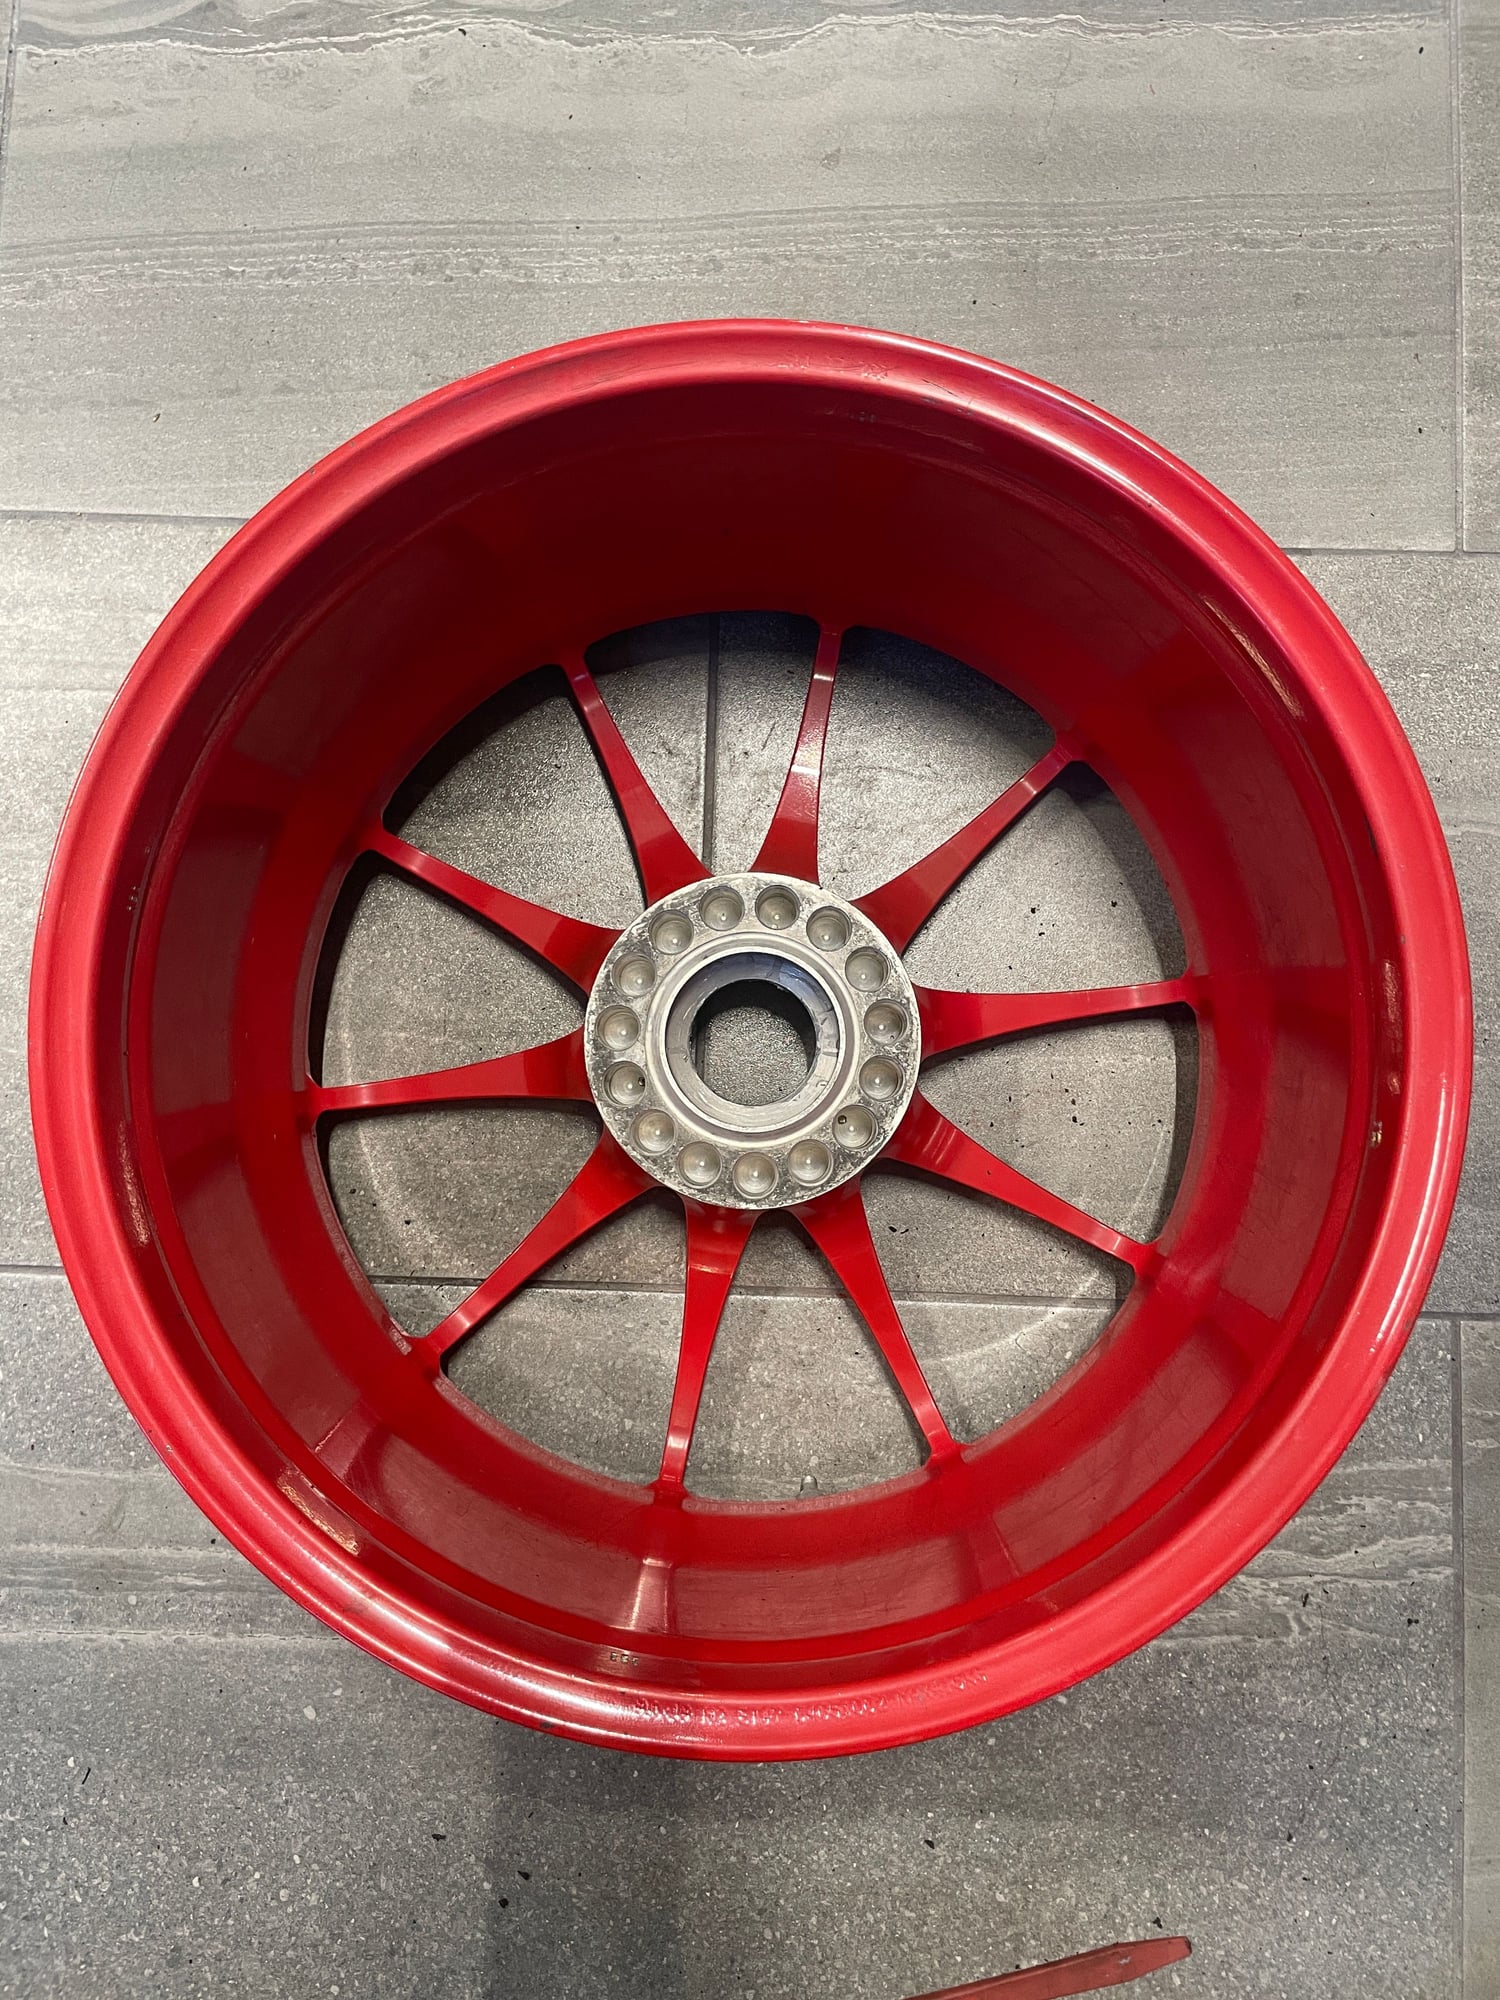 Wheels and Tires/Axles - OZ 19" Centerlock Wheels Guards Red - Used - 2010 to 2012 Porsche 911 - Gilbert, AZ 85297, United States